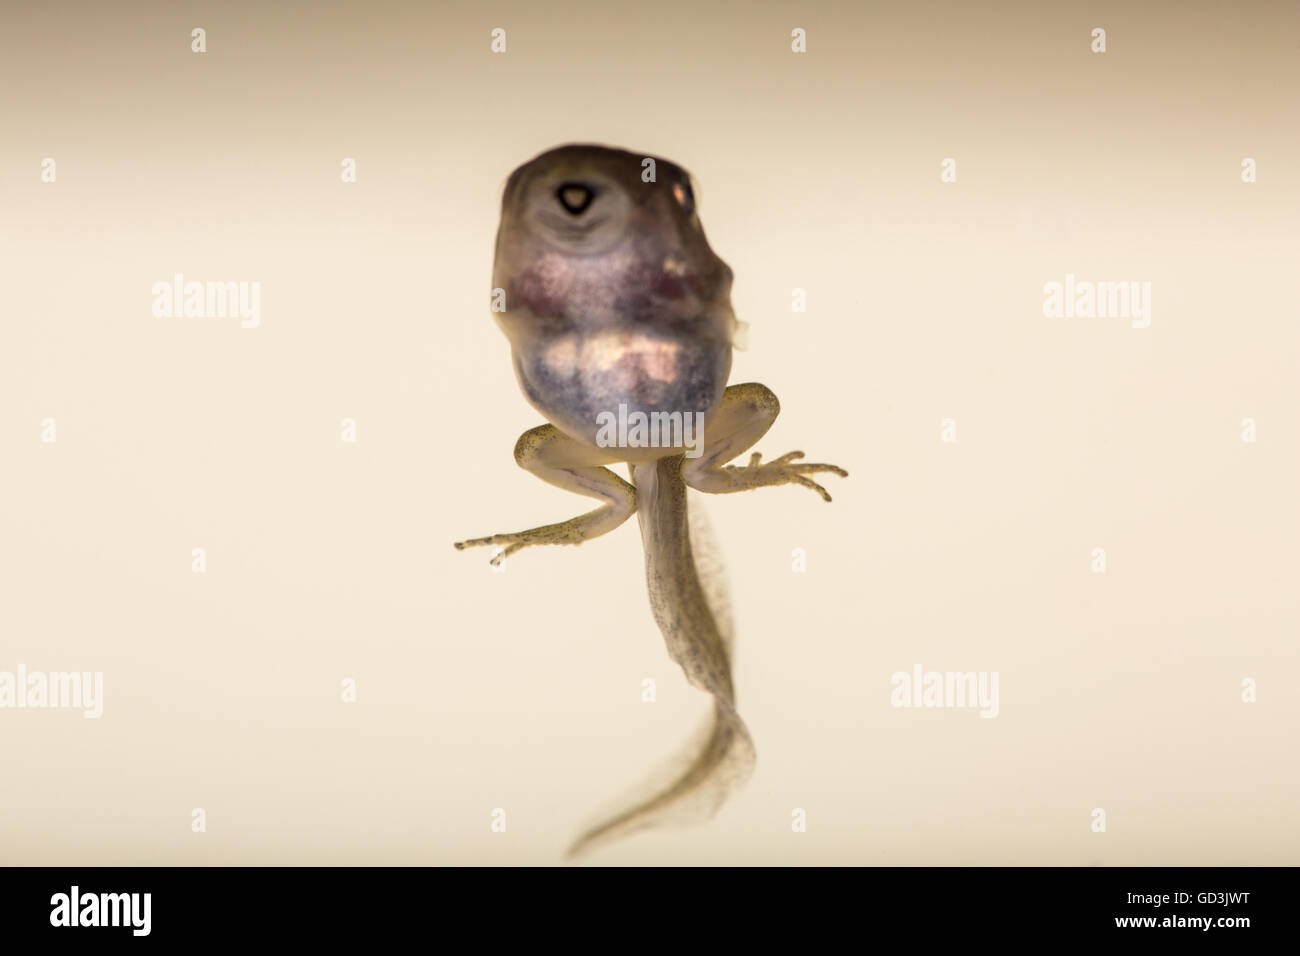 A tadpole (also called a pollywog or polliwog) is the larval stage in the life cycle of an amphibian, particularly that of a fro Stock Photo